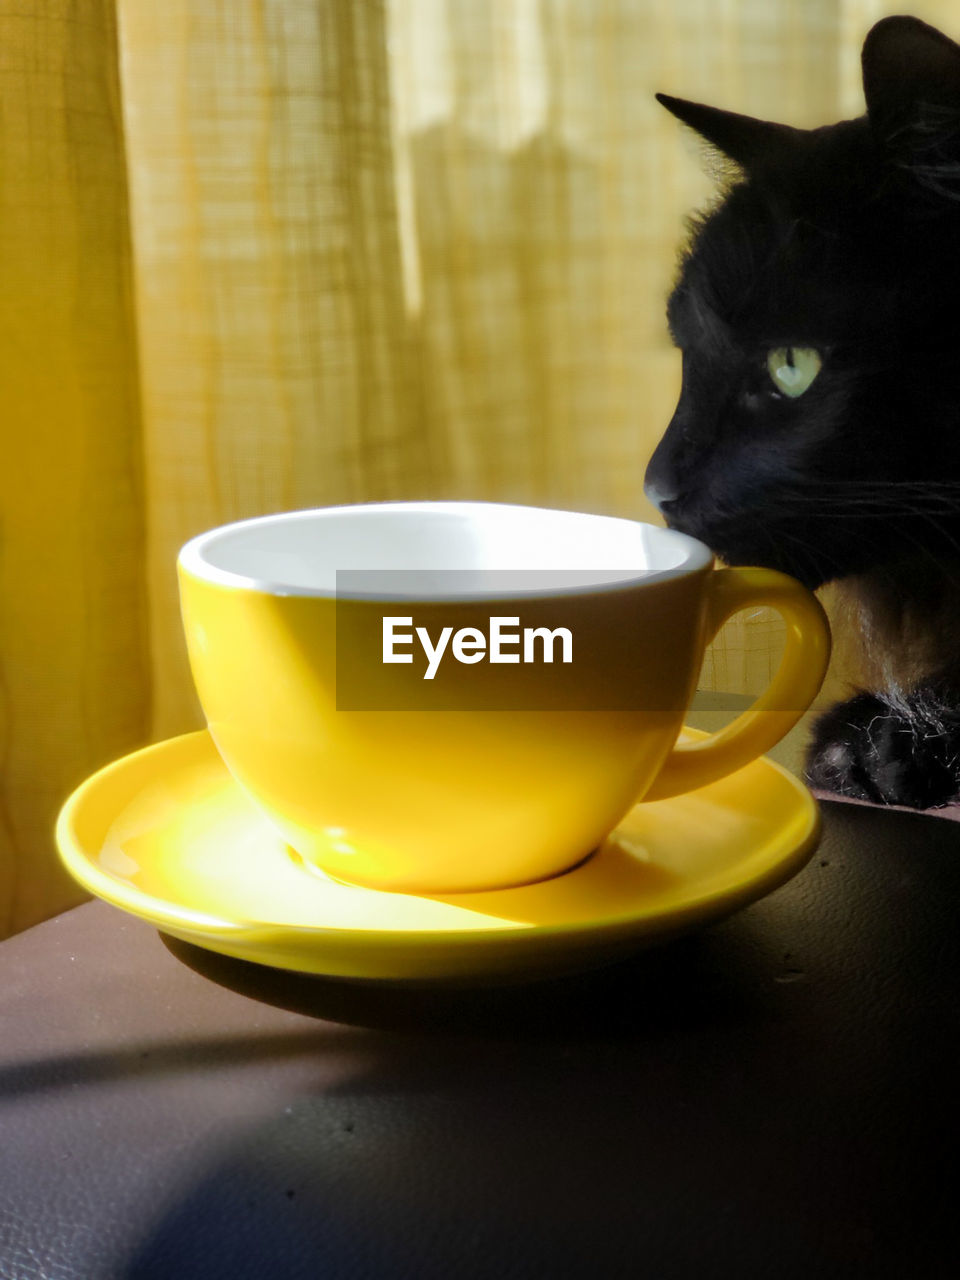 Black cat sniffing offee cup on table